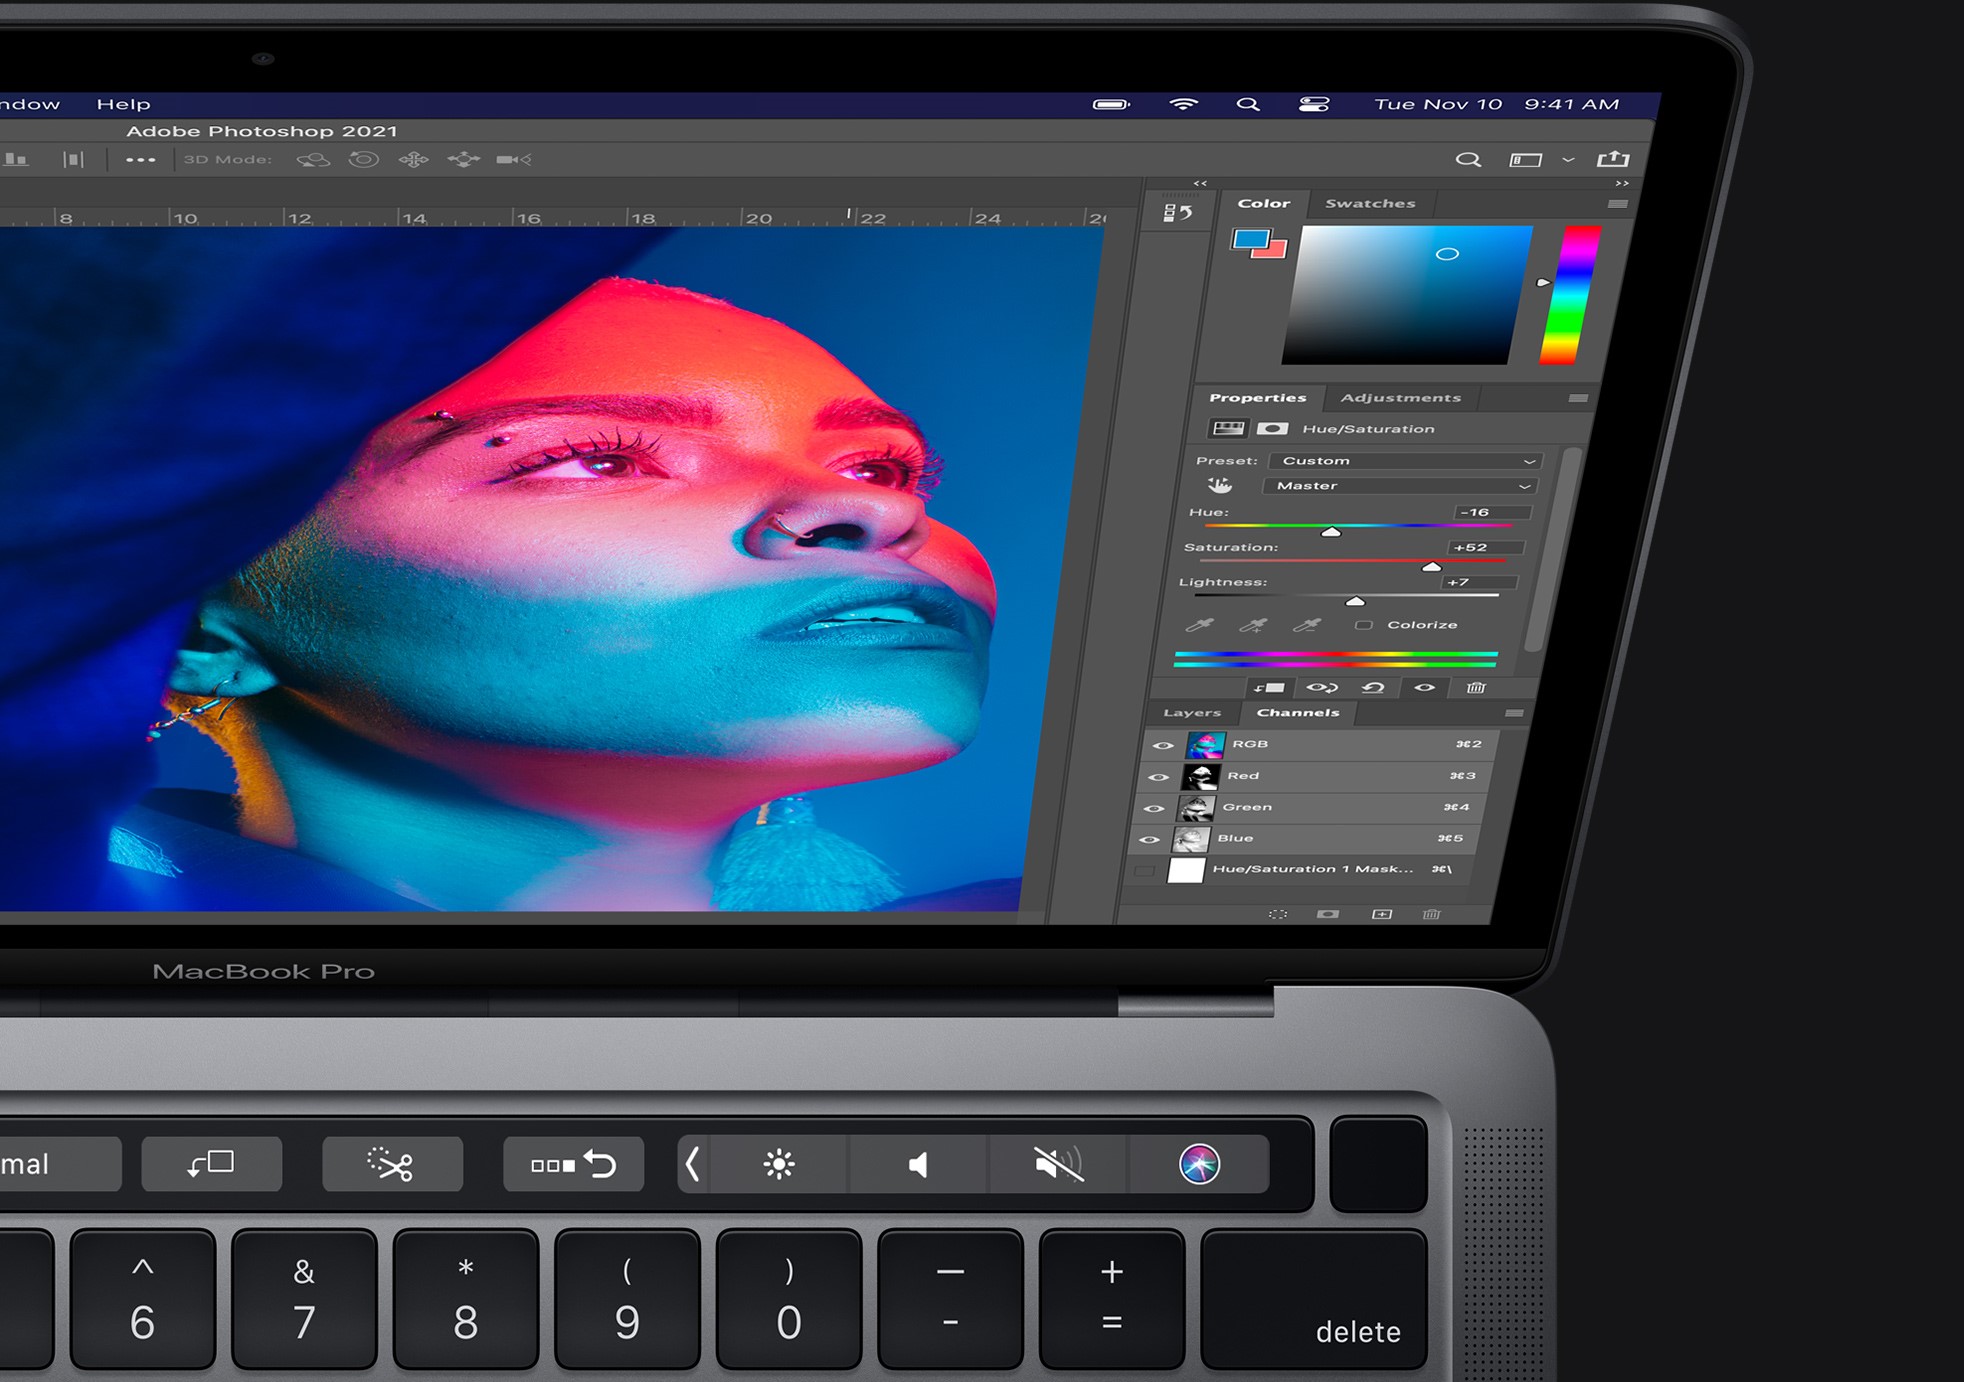 adobe photoshop for mac versions